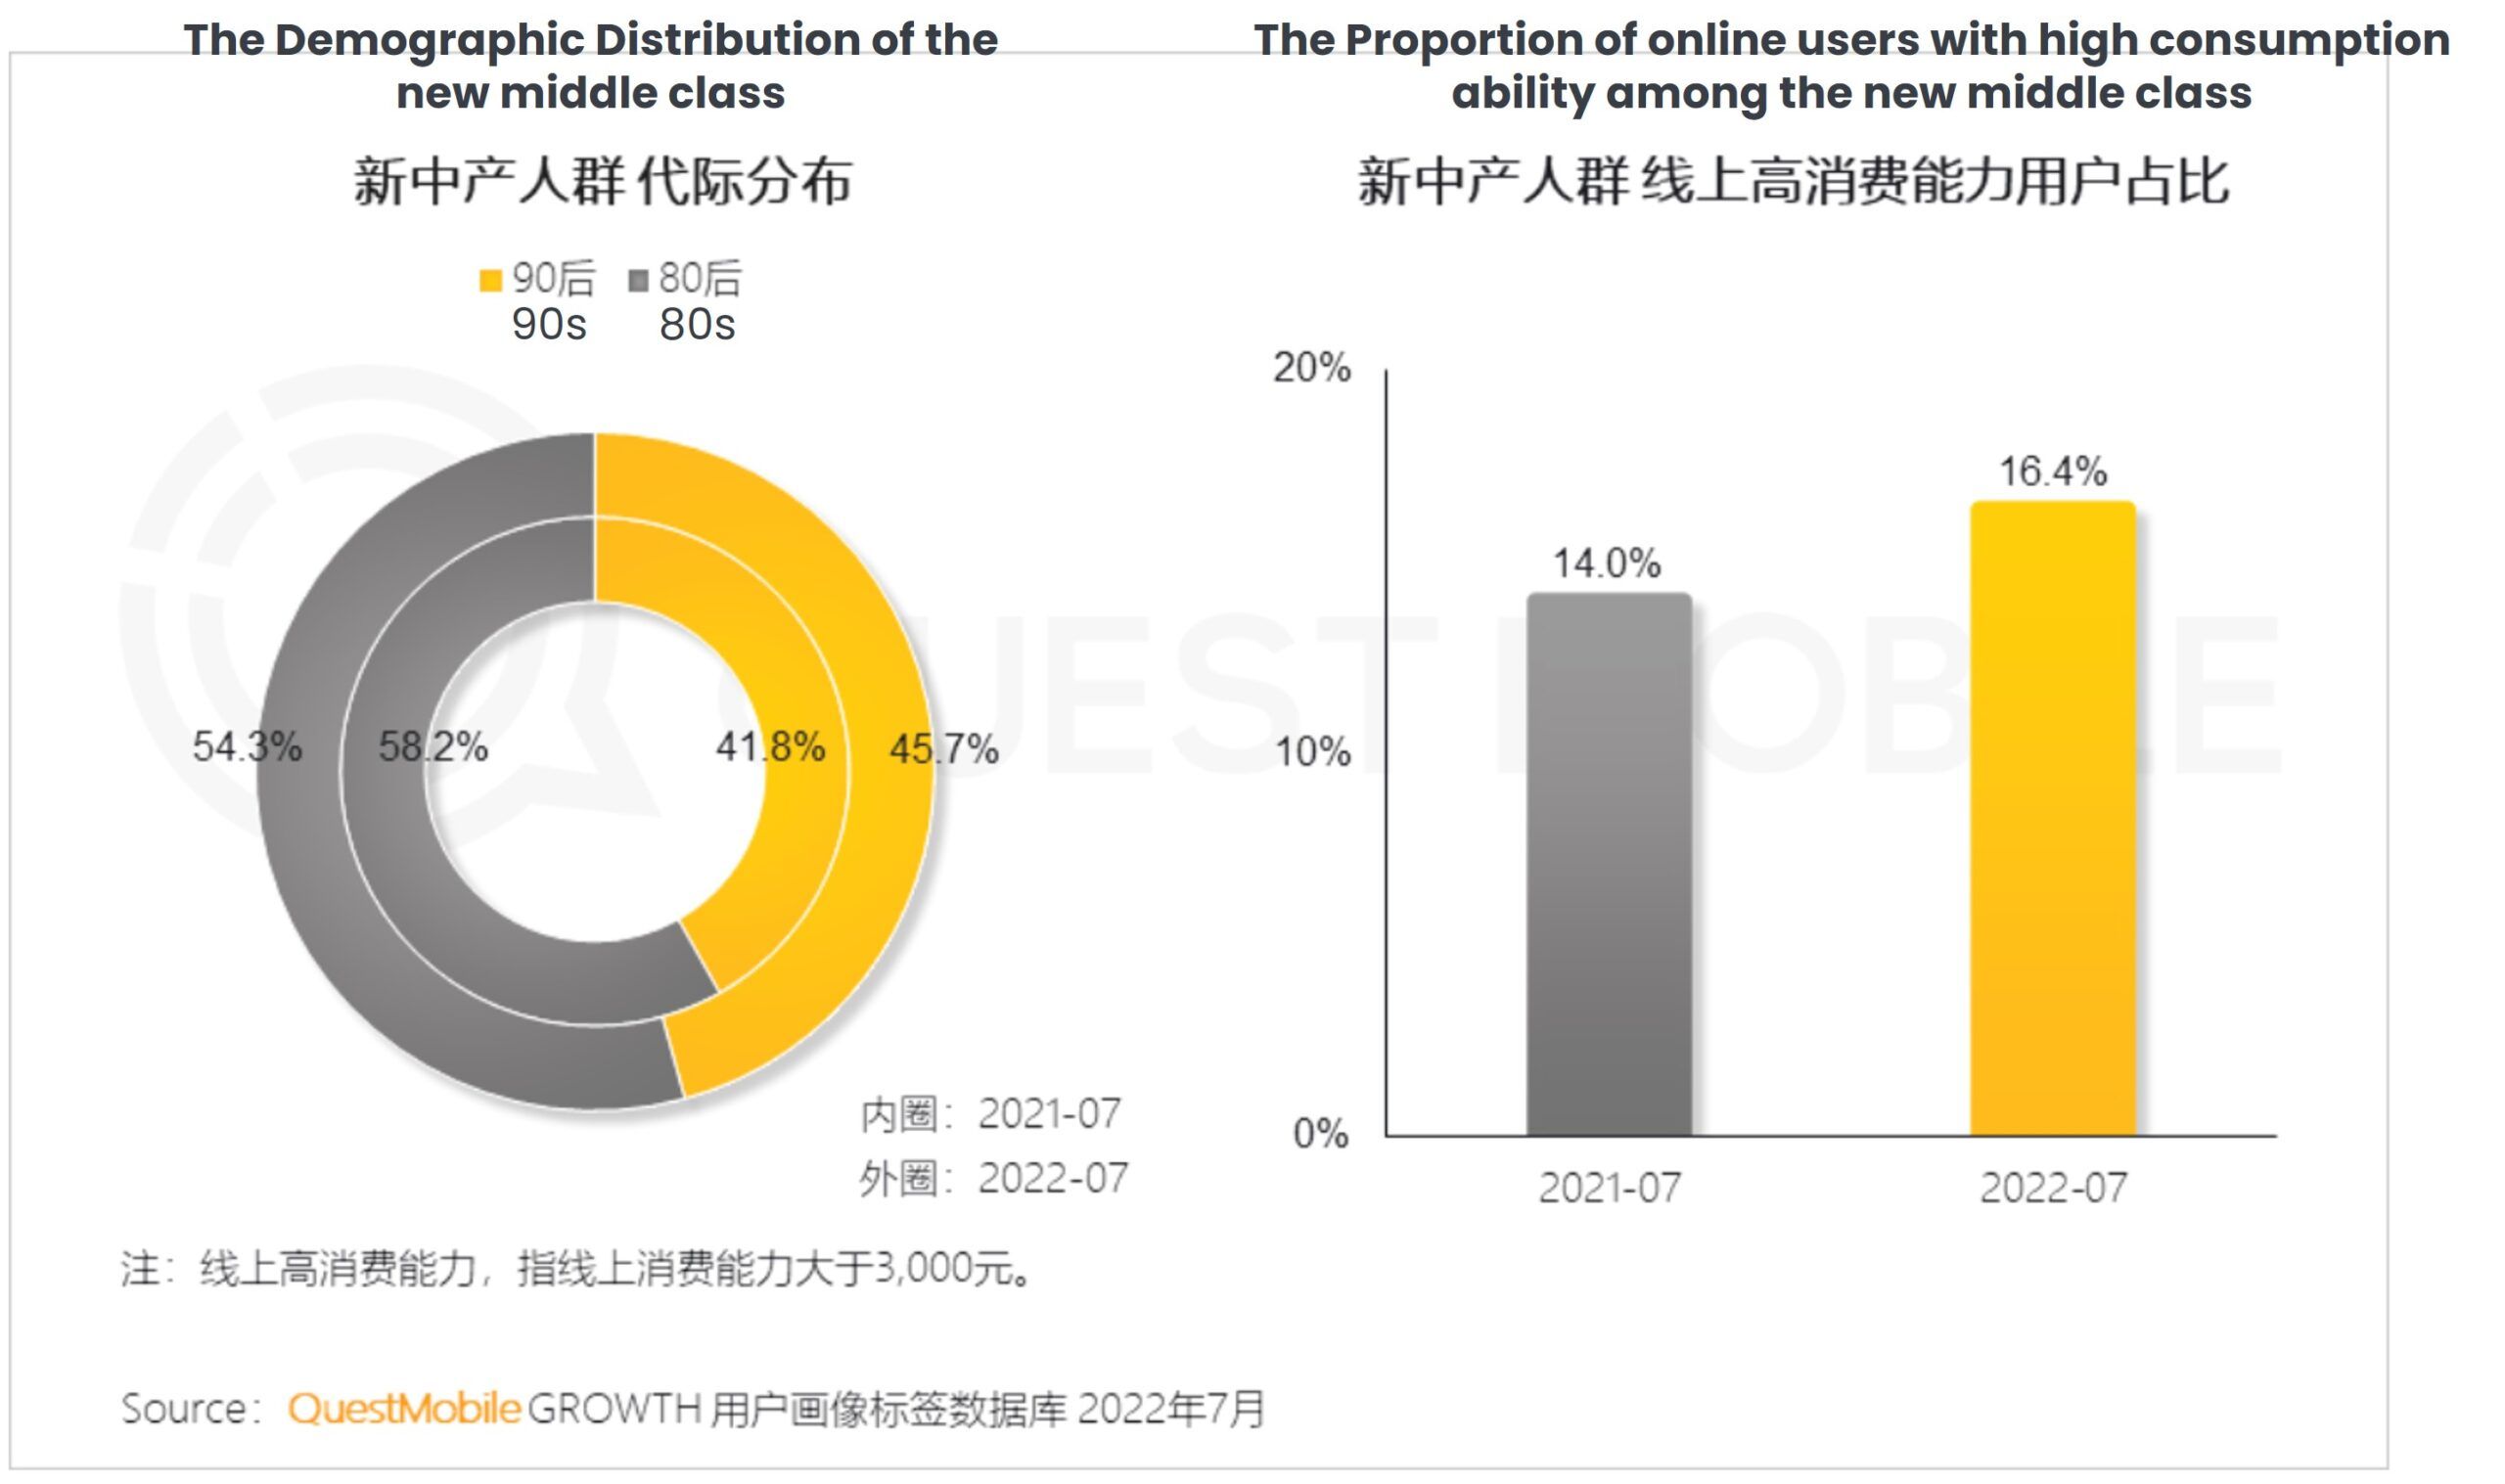 Demographics of new middle class in China